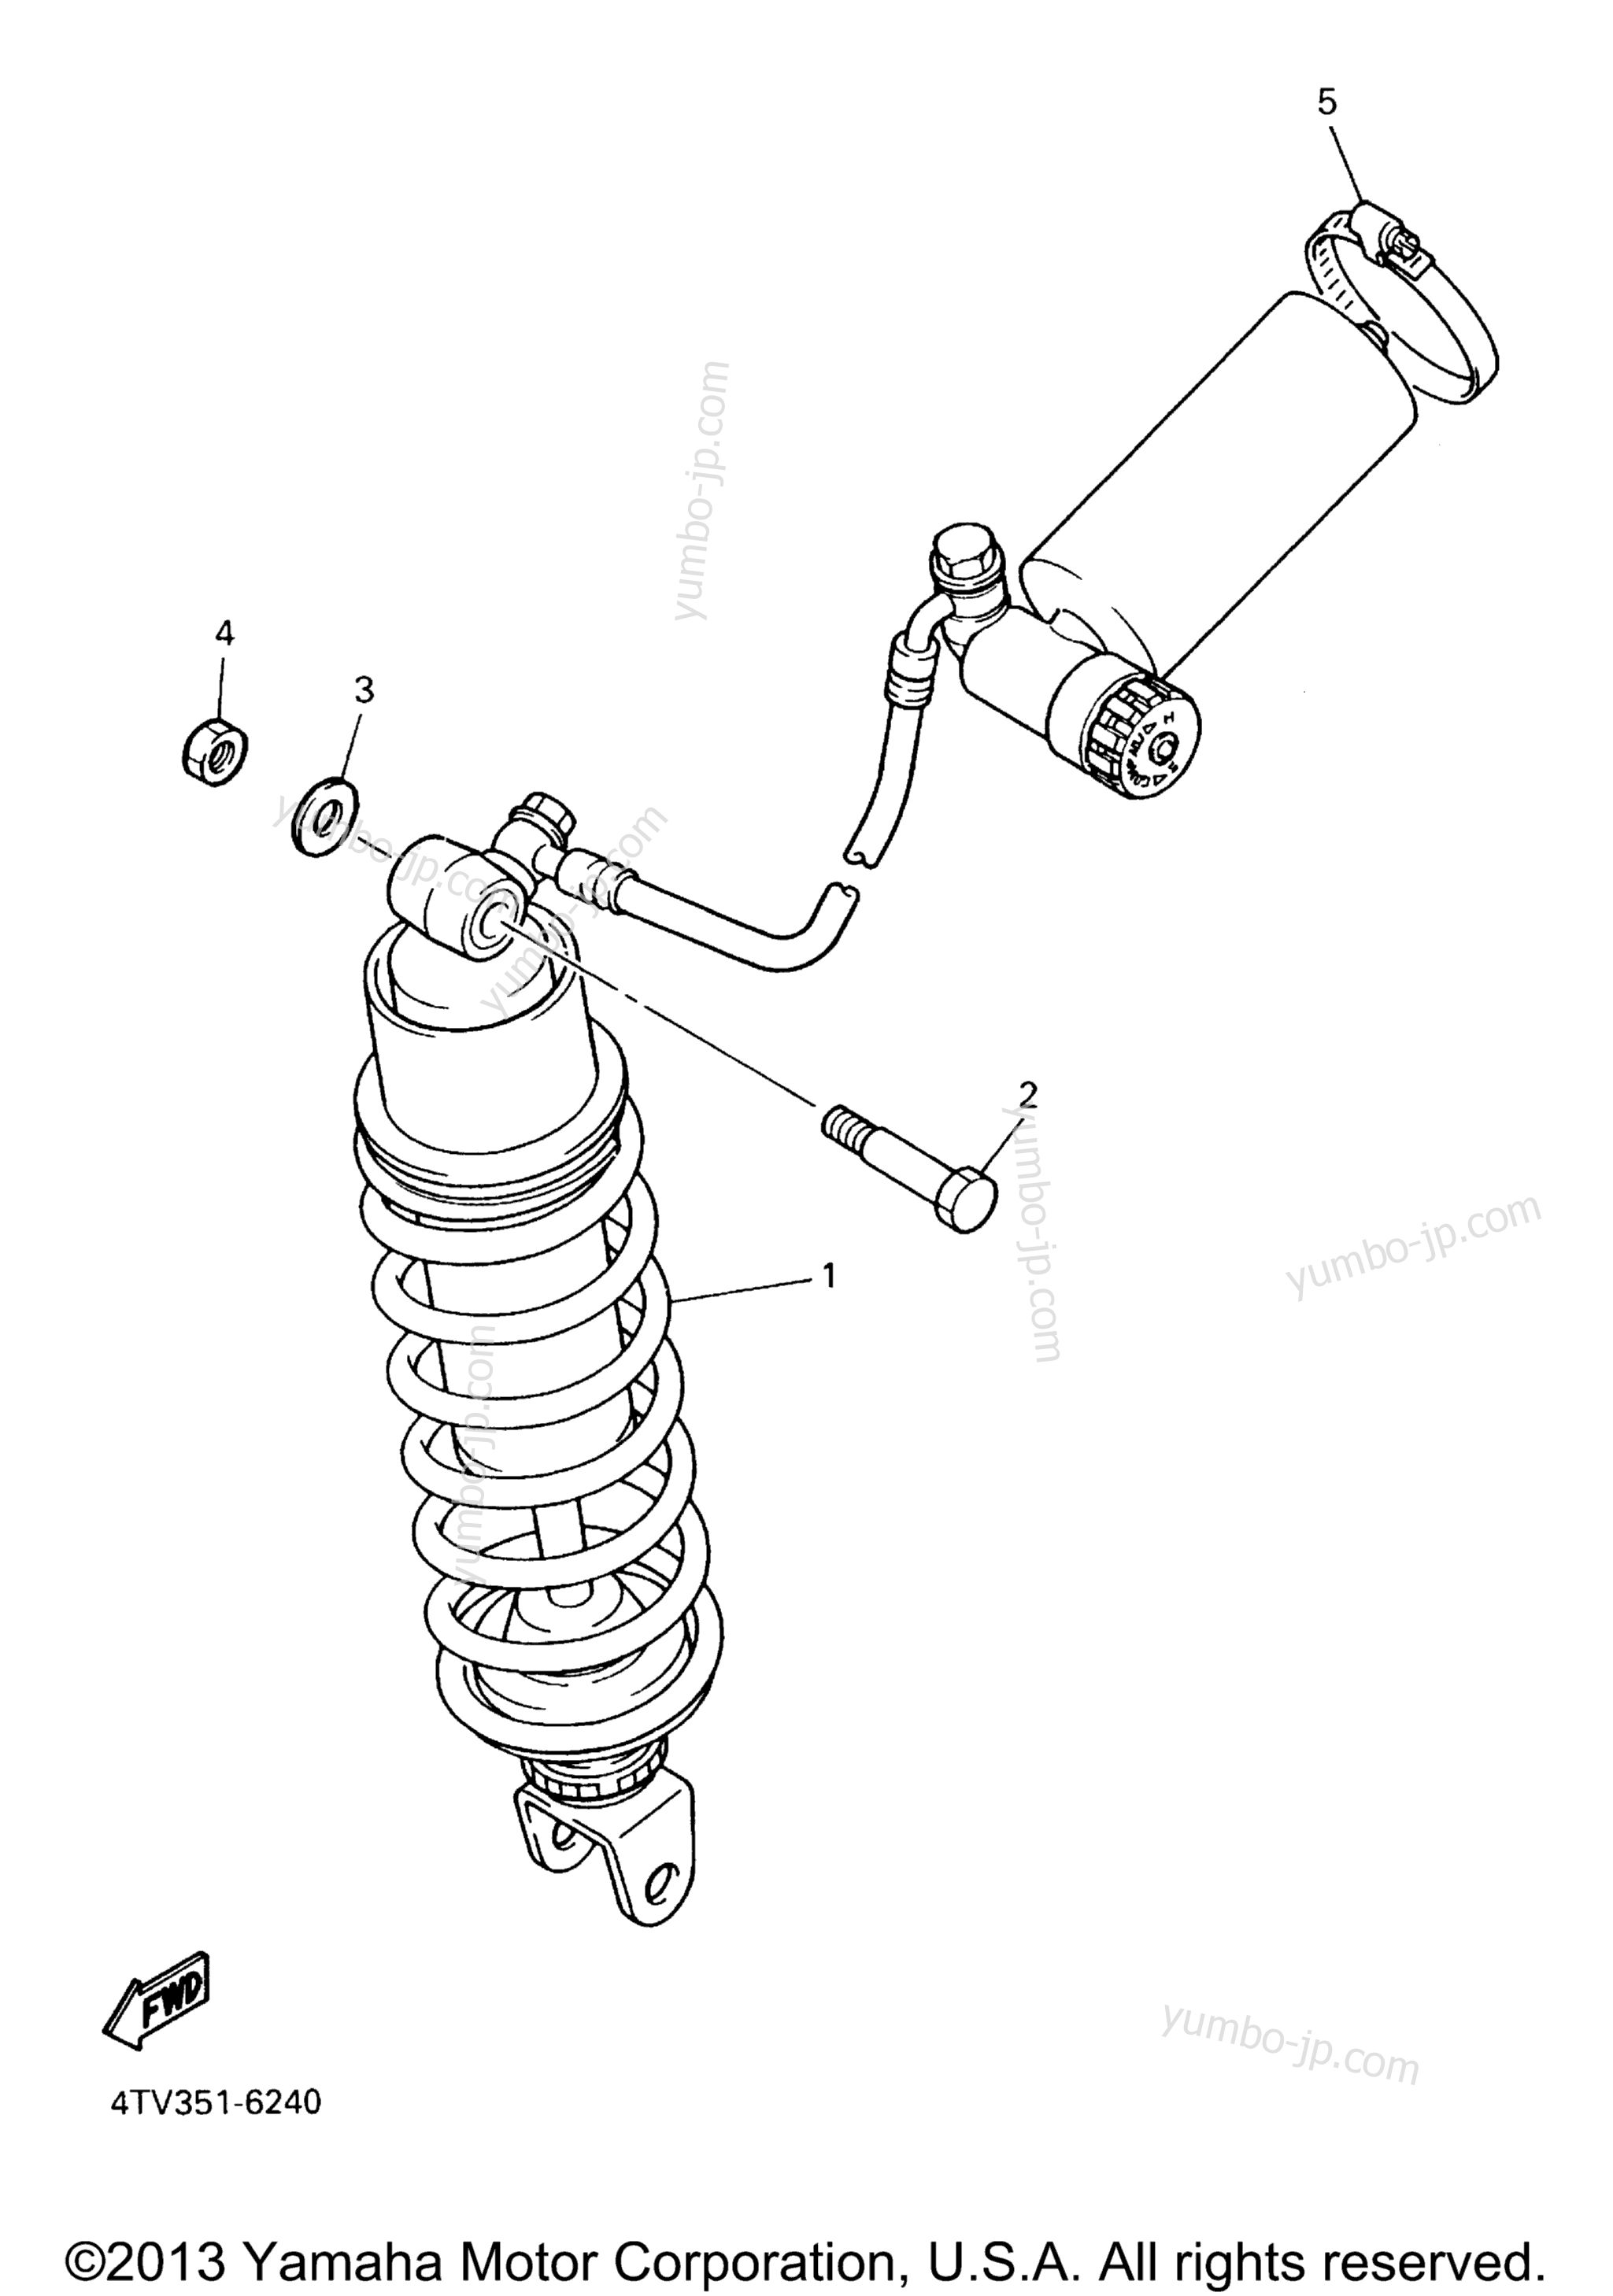 Rear Suspension for motorcycles YAMAHA YZF600R (YZF600RSC) CA 2004 year